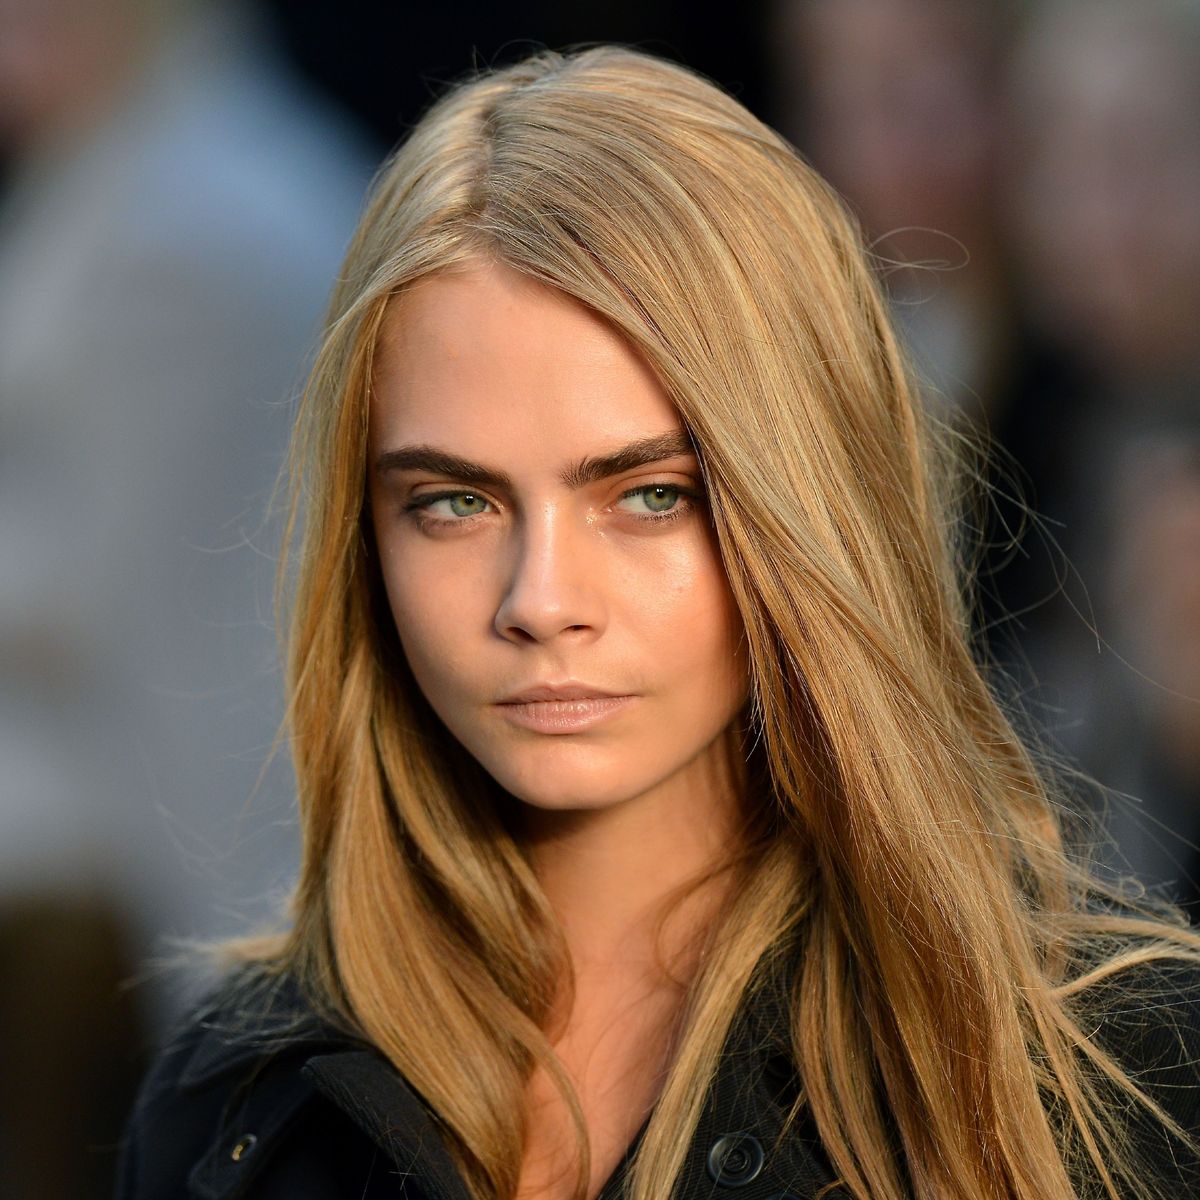 Cara Delevingne Battled Depression as a Teen - Celebrities with ...